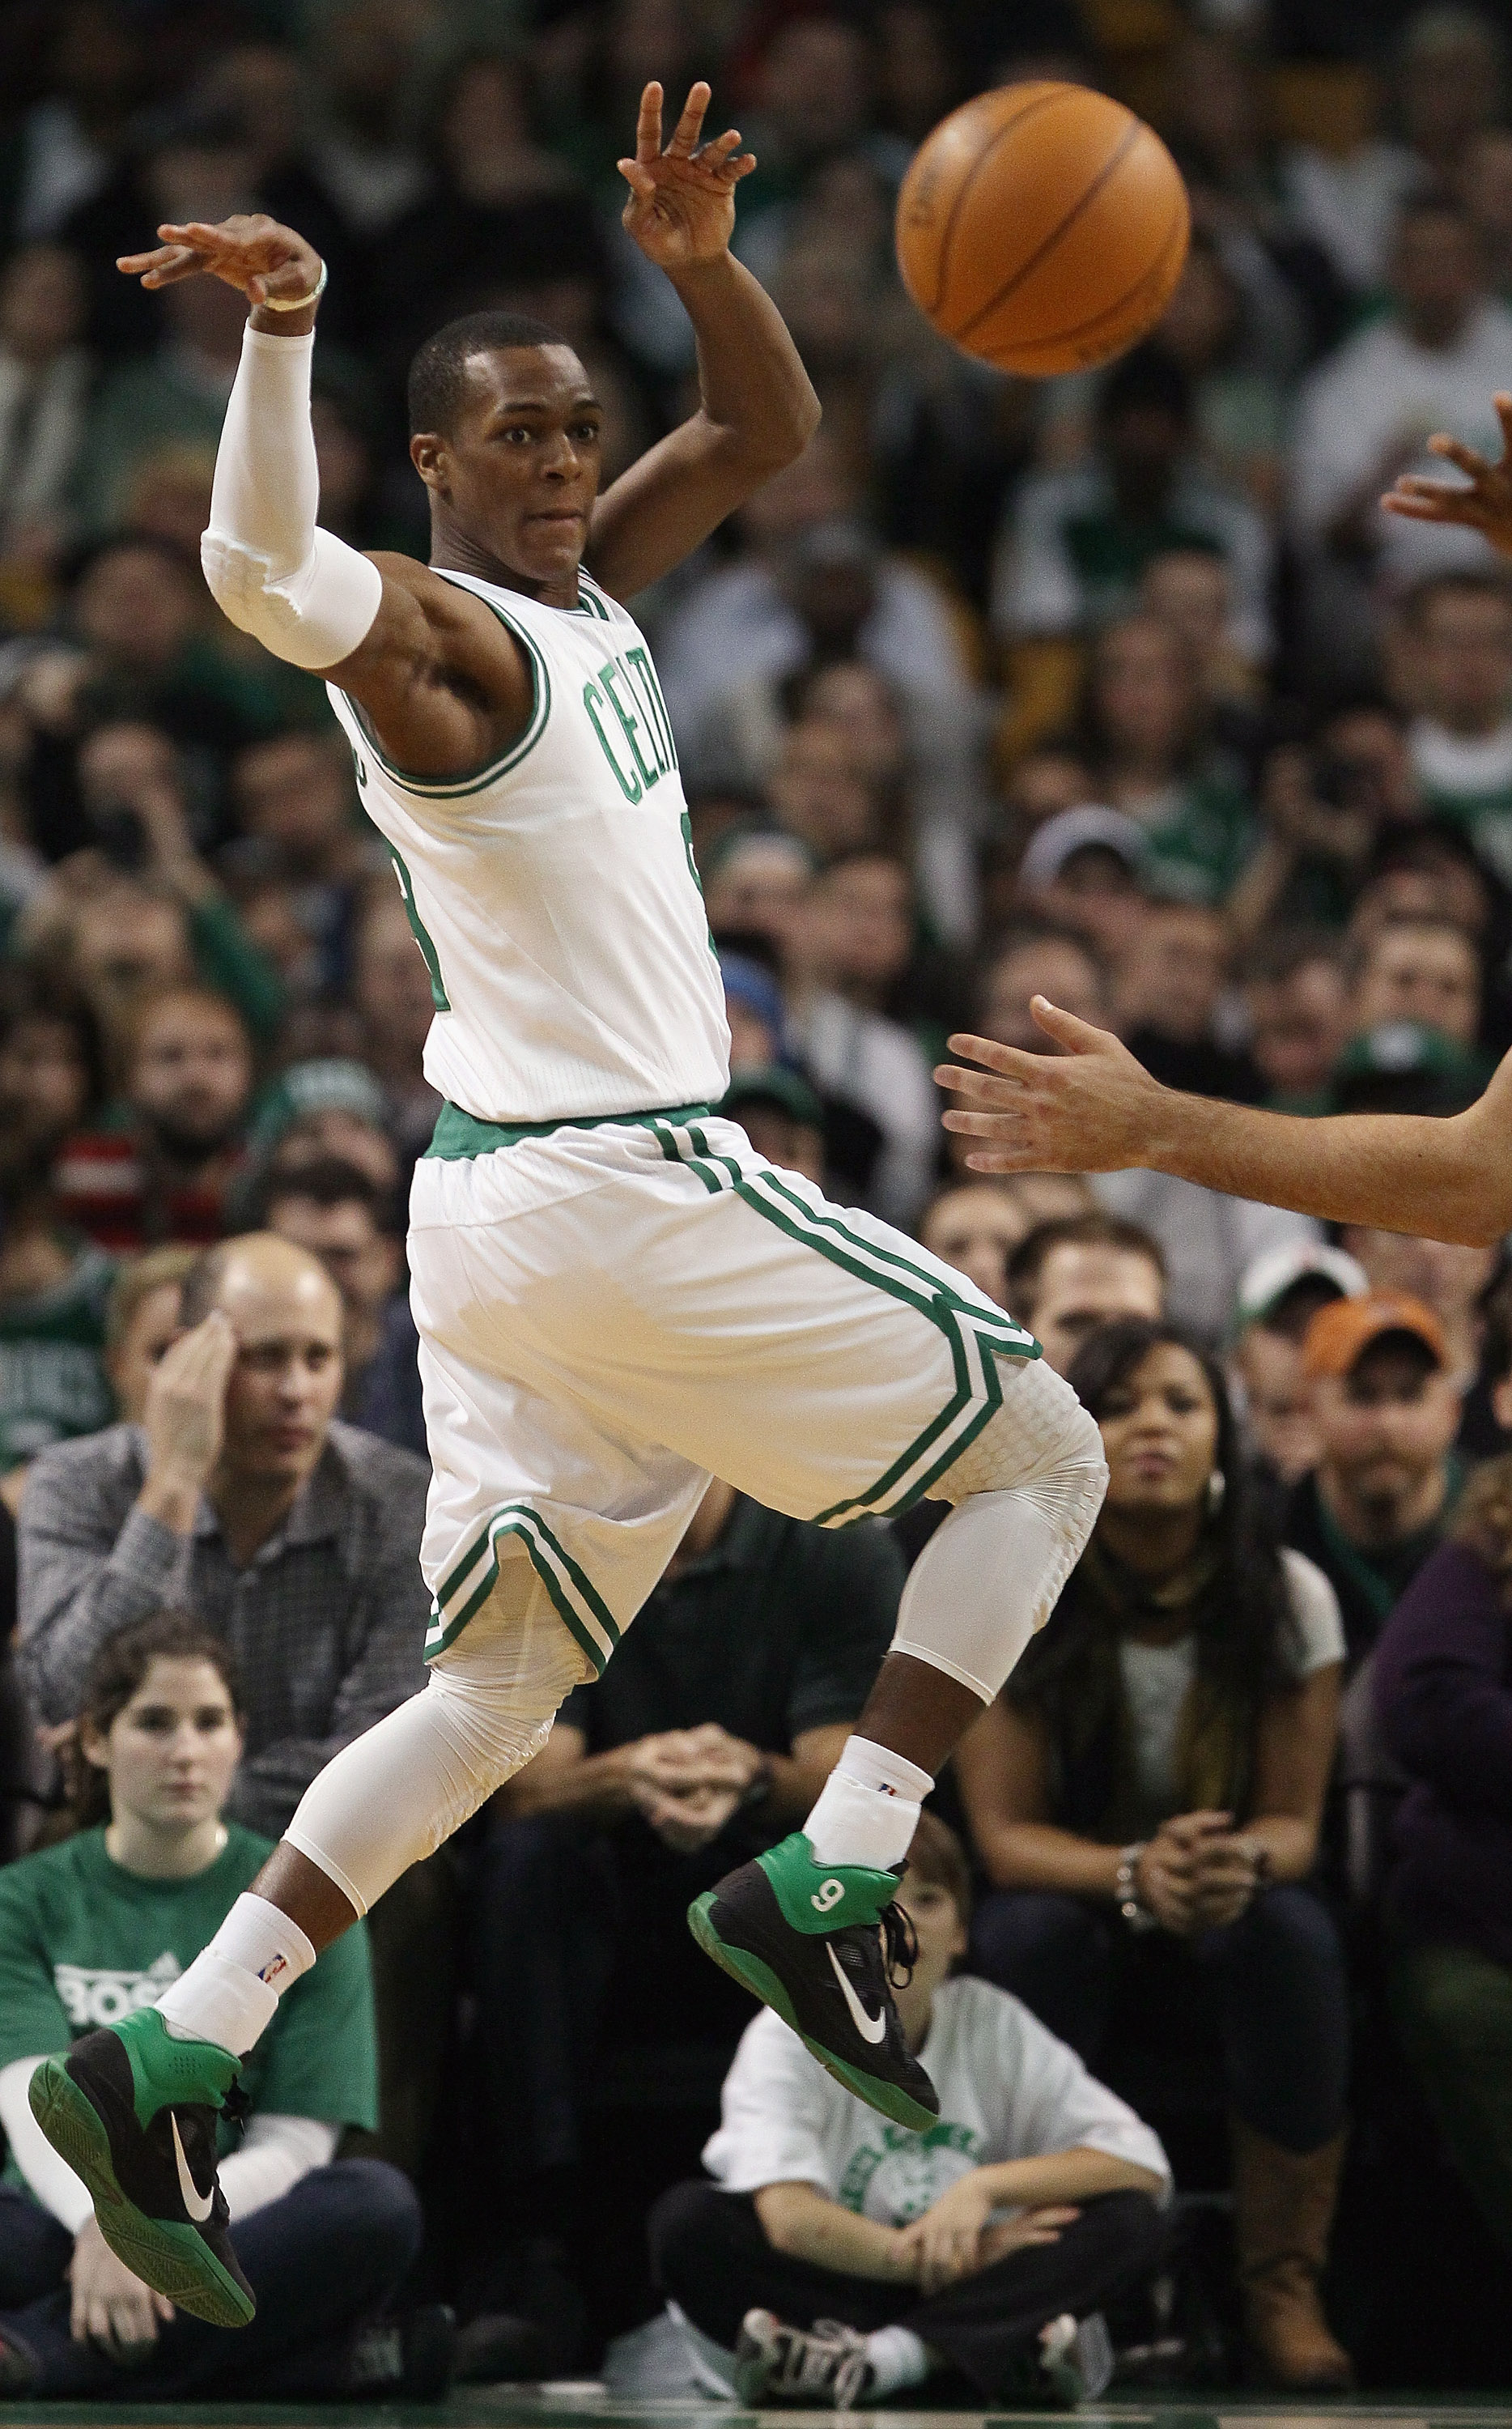 BOSTON, MA - JANUARY 10:  Rajon Rondo #9 of the Boston Celtics passes the ball in the second half against the Houston Rockets on January 10, 2011 at the TD Garden in Boston, Massachusetts.  The Rockets defeated the Celtics 108-102. NOTE TO USER: User expr